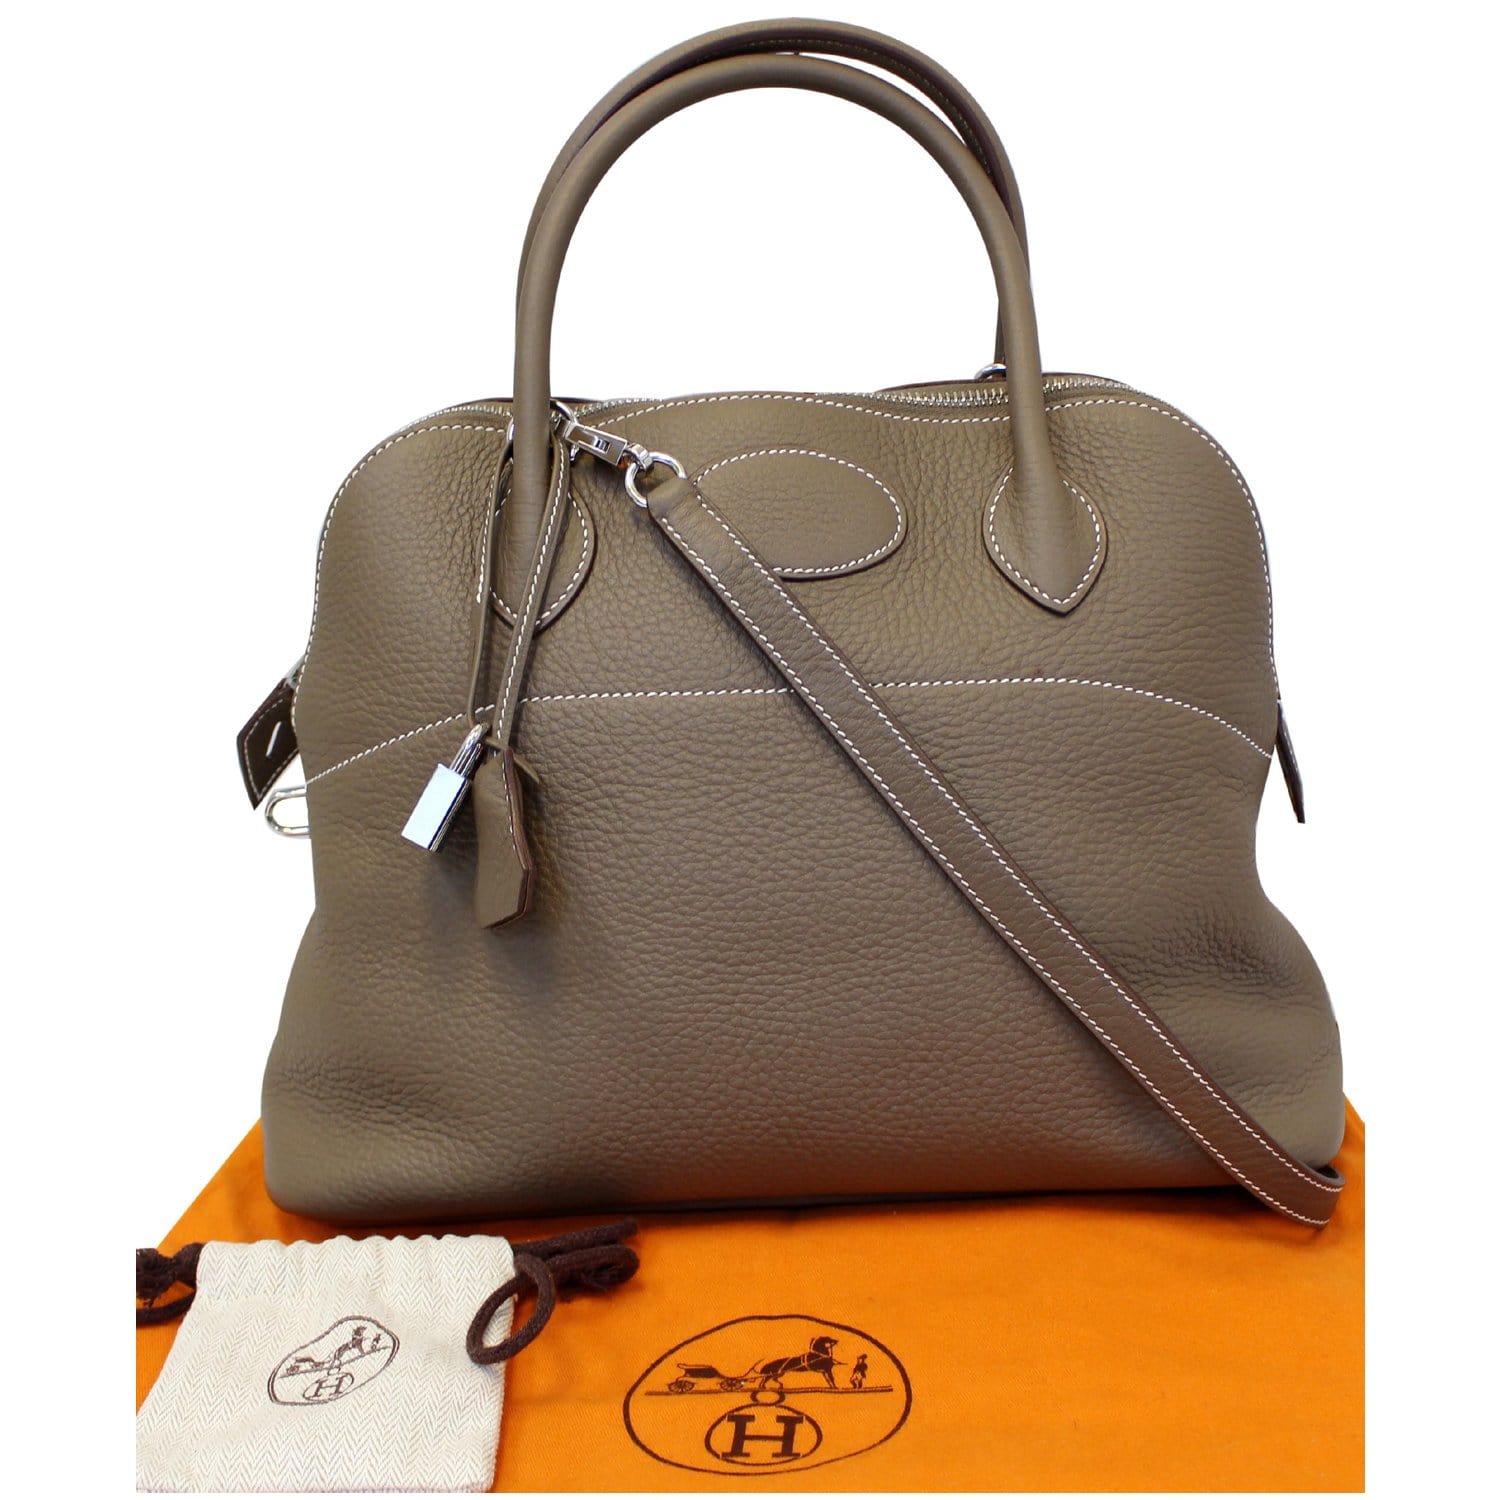 HERMES BOLIDE 31 TAURILLON CLEMENCE BROWN